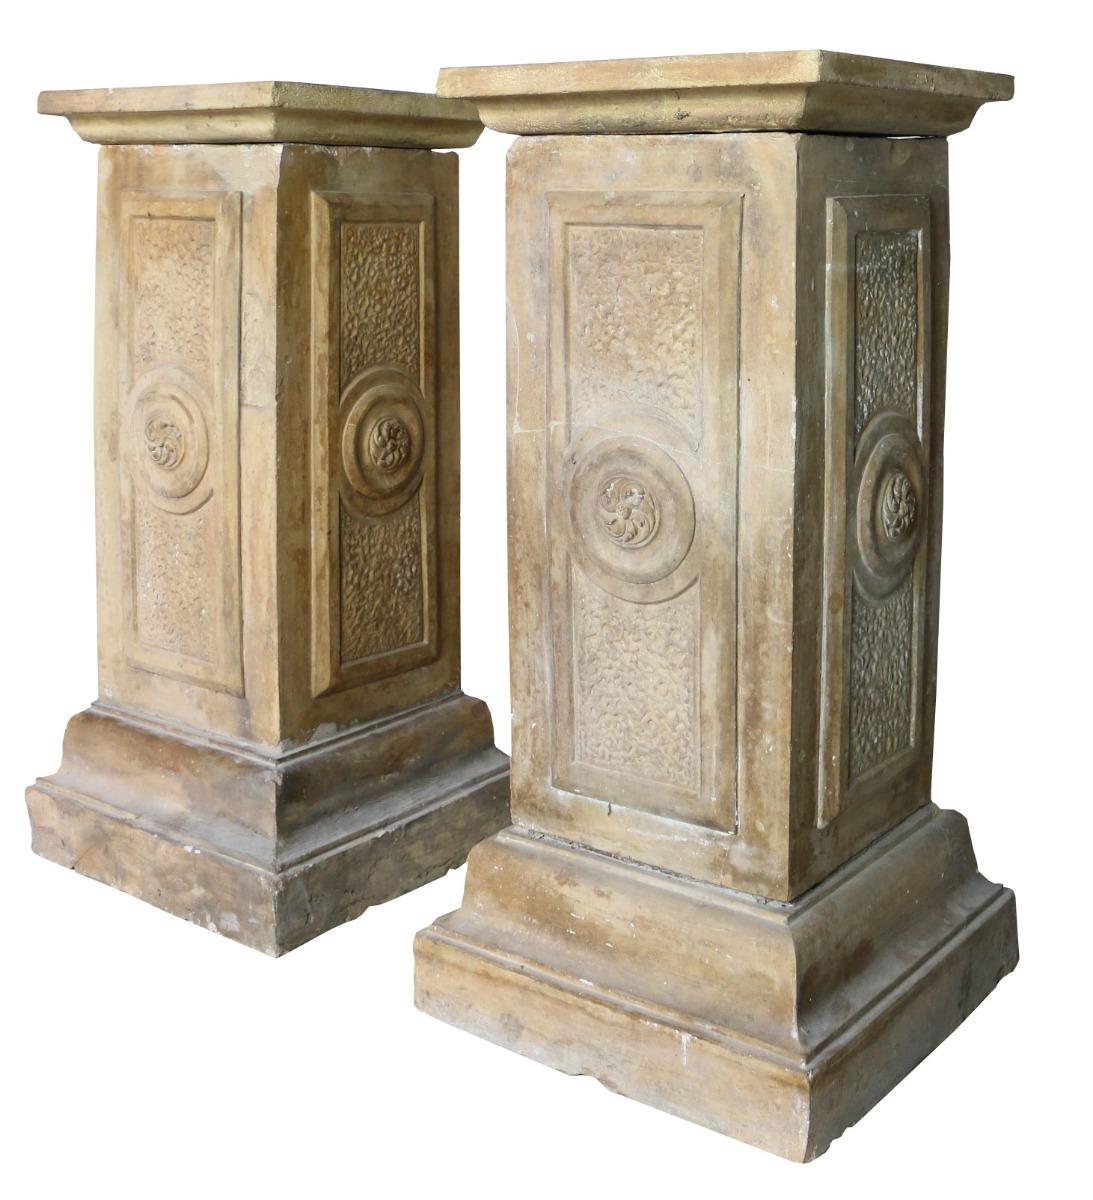 A pair of antique buff terracotta pedestals for interior or exterior use. Additional Dimensions: Height 96.5 cm Base 46 x 46.5 cm Top 42×42 cm Weight 125 kg each.